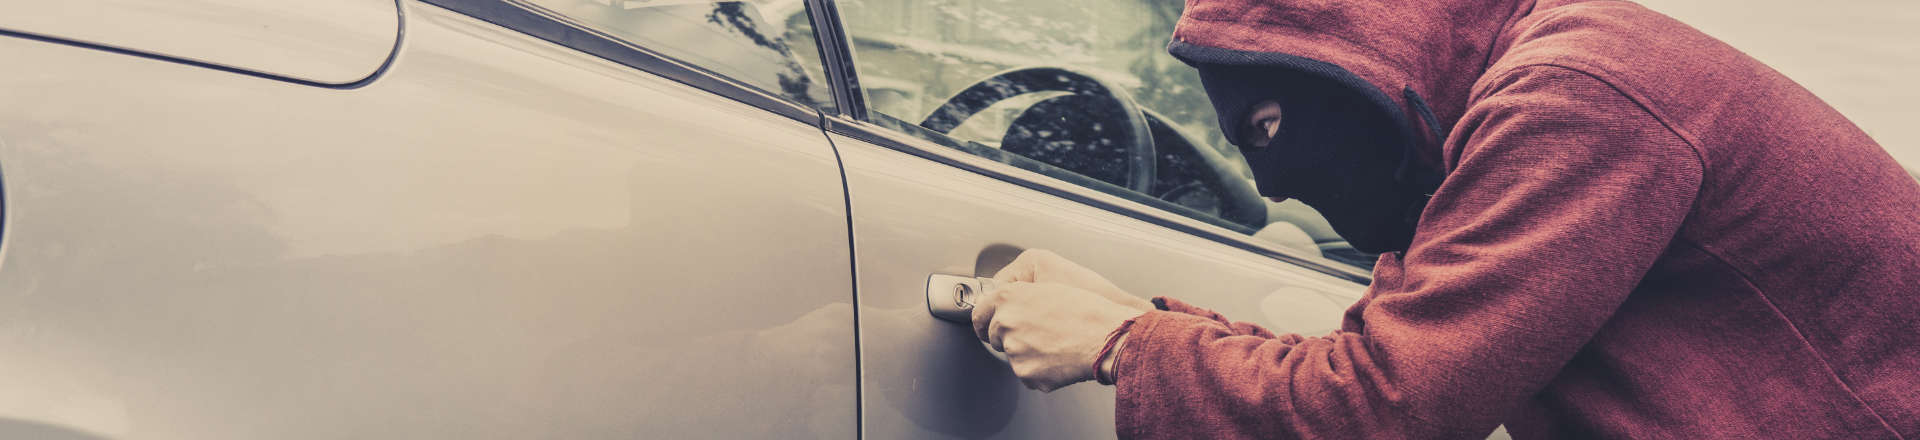 a man with covered face trying to break a car lock